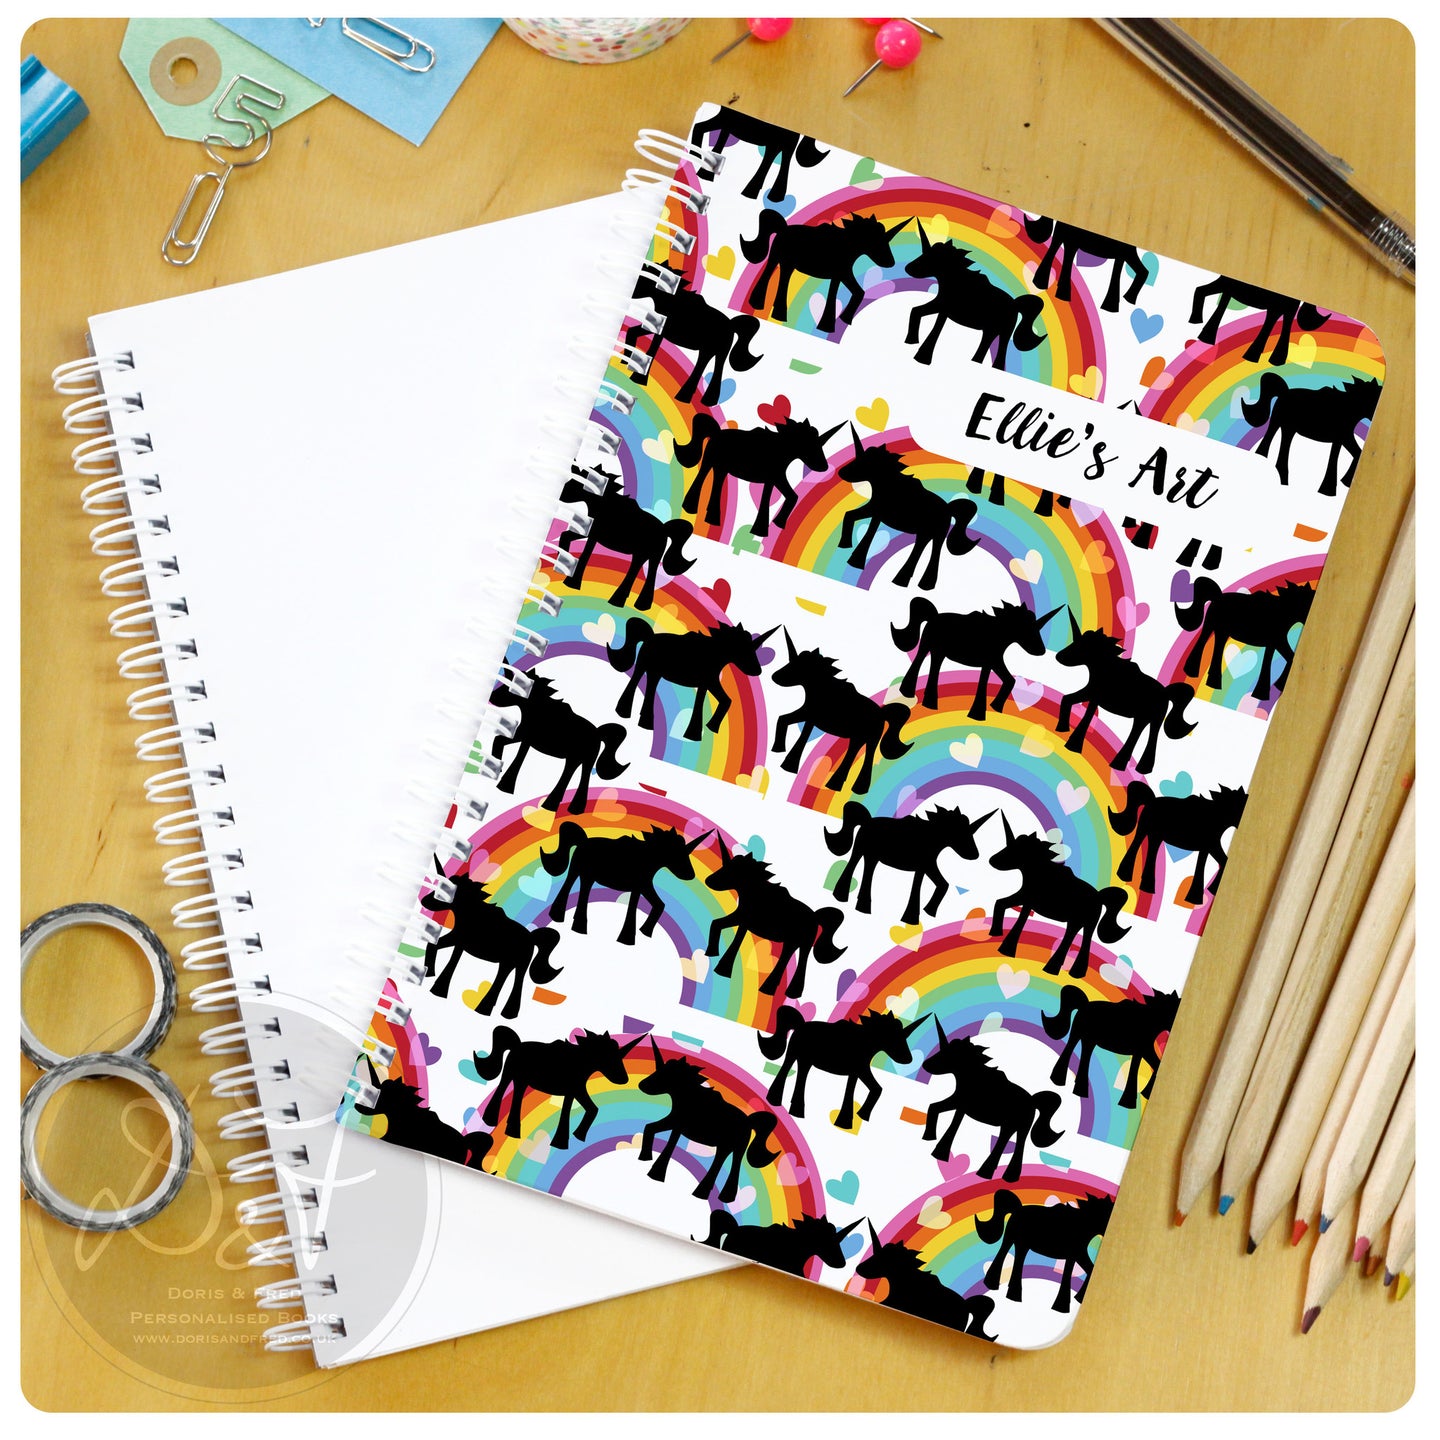 Personalised plain notebook A5 or A4